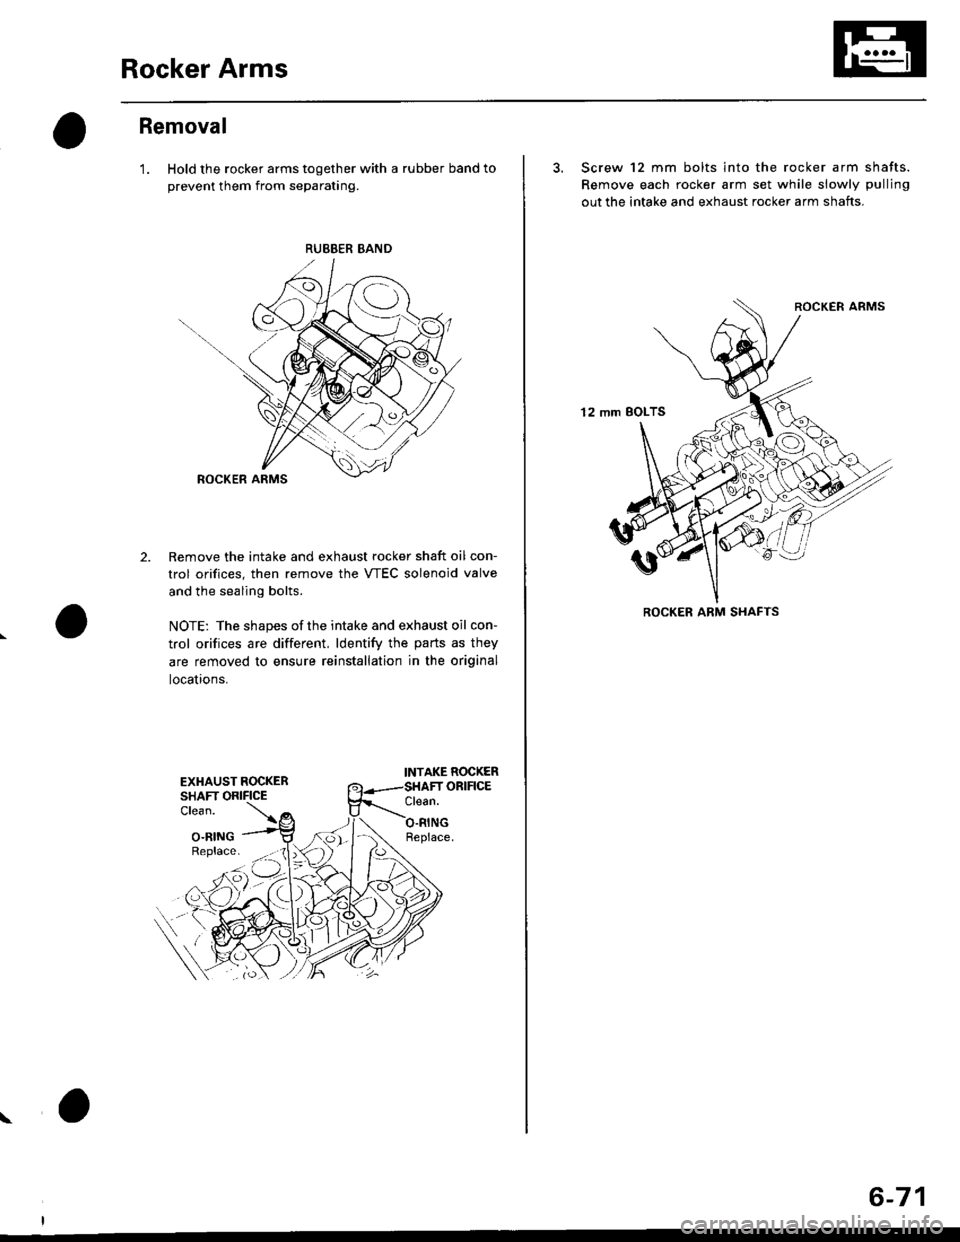 HONDA CIVIC 1996 6.G Owners Manual Rocker Arms
Removal
1. Hold the rocker arms together with a rubber band to
prevent them from separating.
Remove the intake and exhaust rocker shaft oil con-
trol orifices, then remove the VTEC soleno